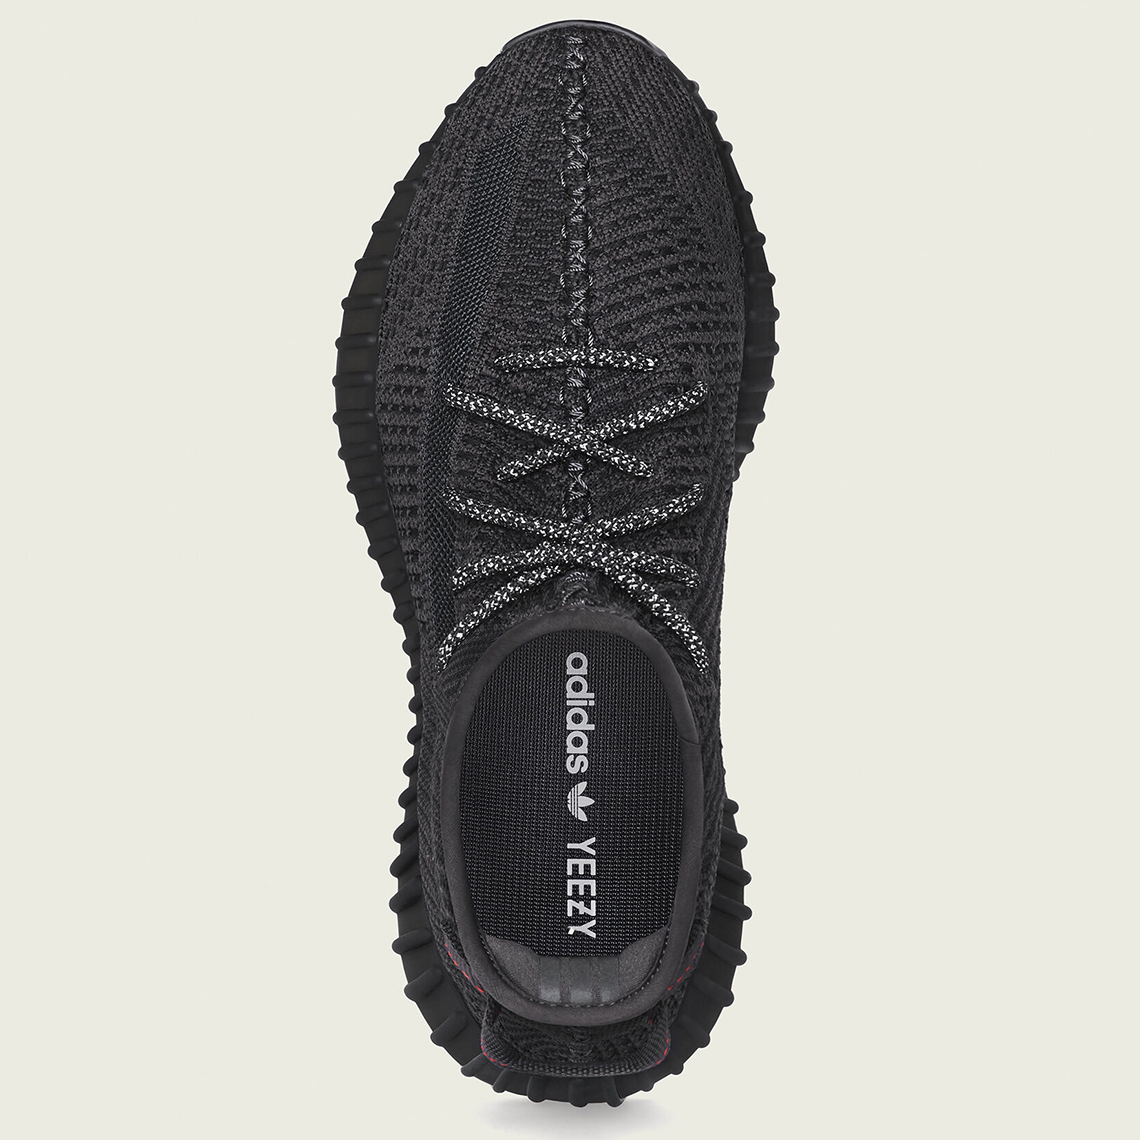 Yeezy Boost 350 Price In Dubai Clearance, 53% OFF |  www.playadivingcenter.com